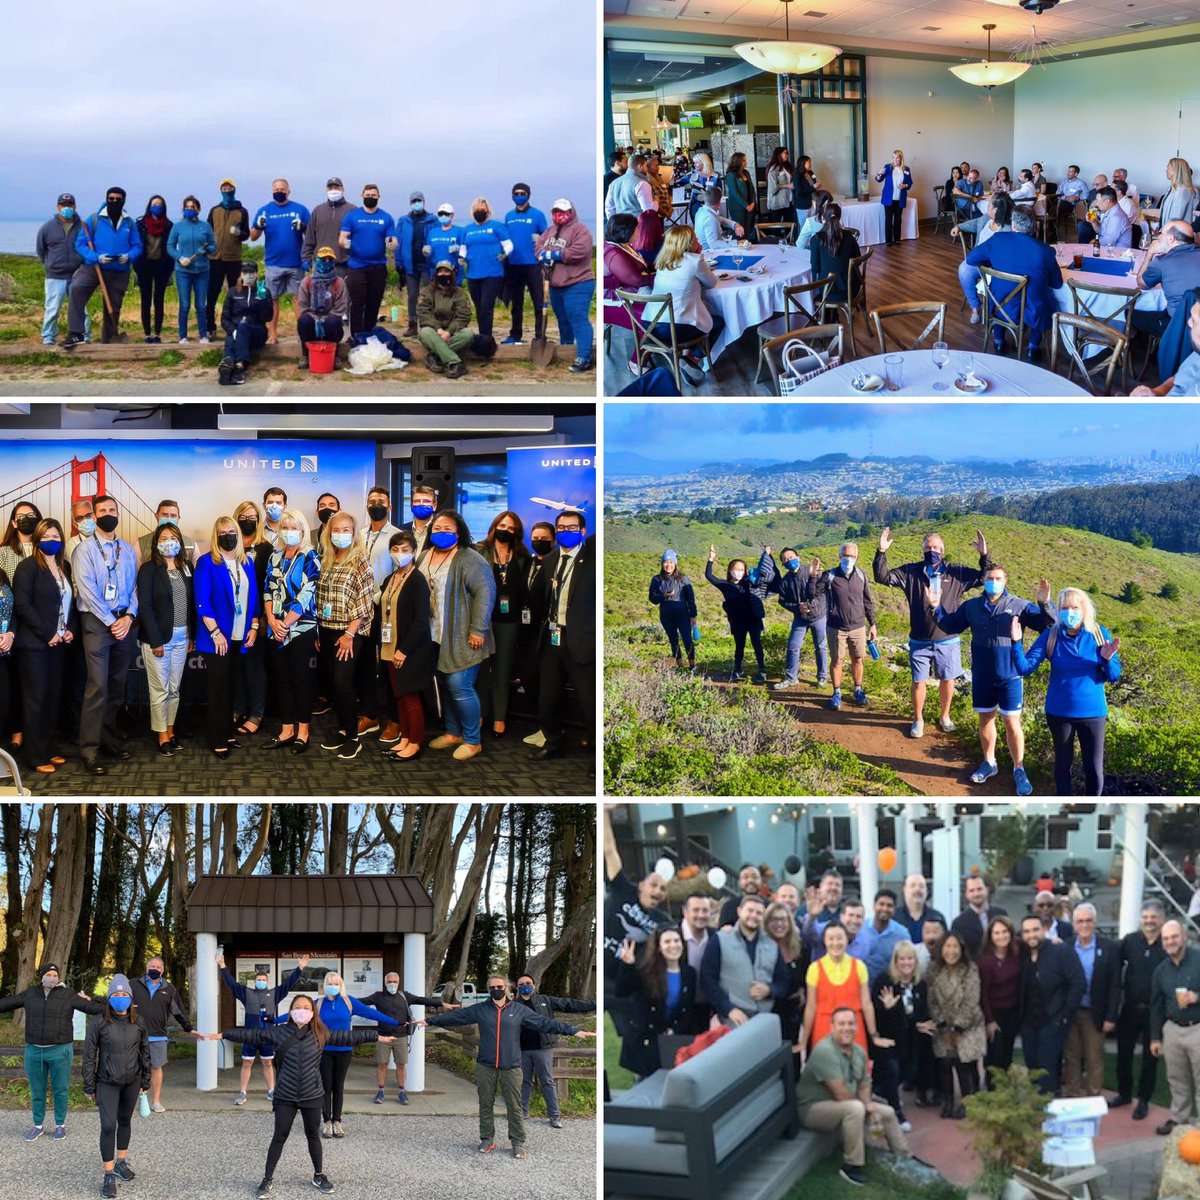 Happy New Year from the NWCoast UMA board! We loved having you at the events in 2021 and we’re looking forward to seeing you in the 2️⃣0️⃣2️⃣2️⃣ events! If you aren’t already a member, you can sign up using your FT credentials at uma.united.com/my-account. #BeingUnited #NWCoastUMA